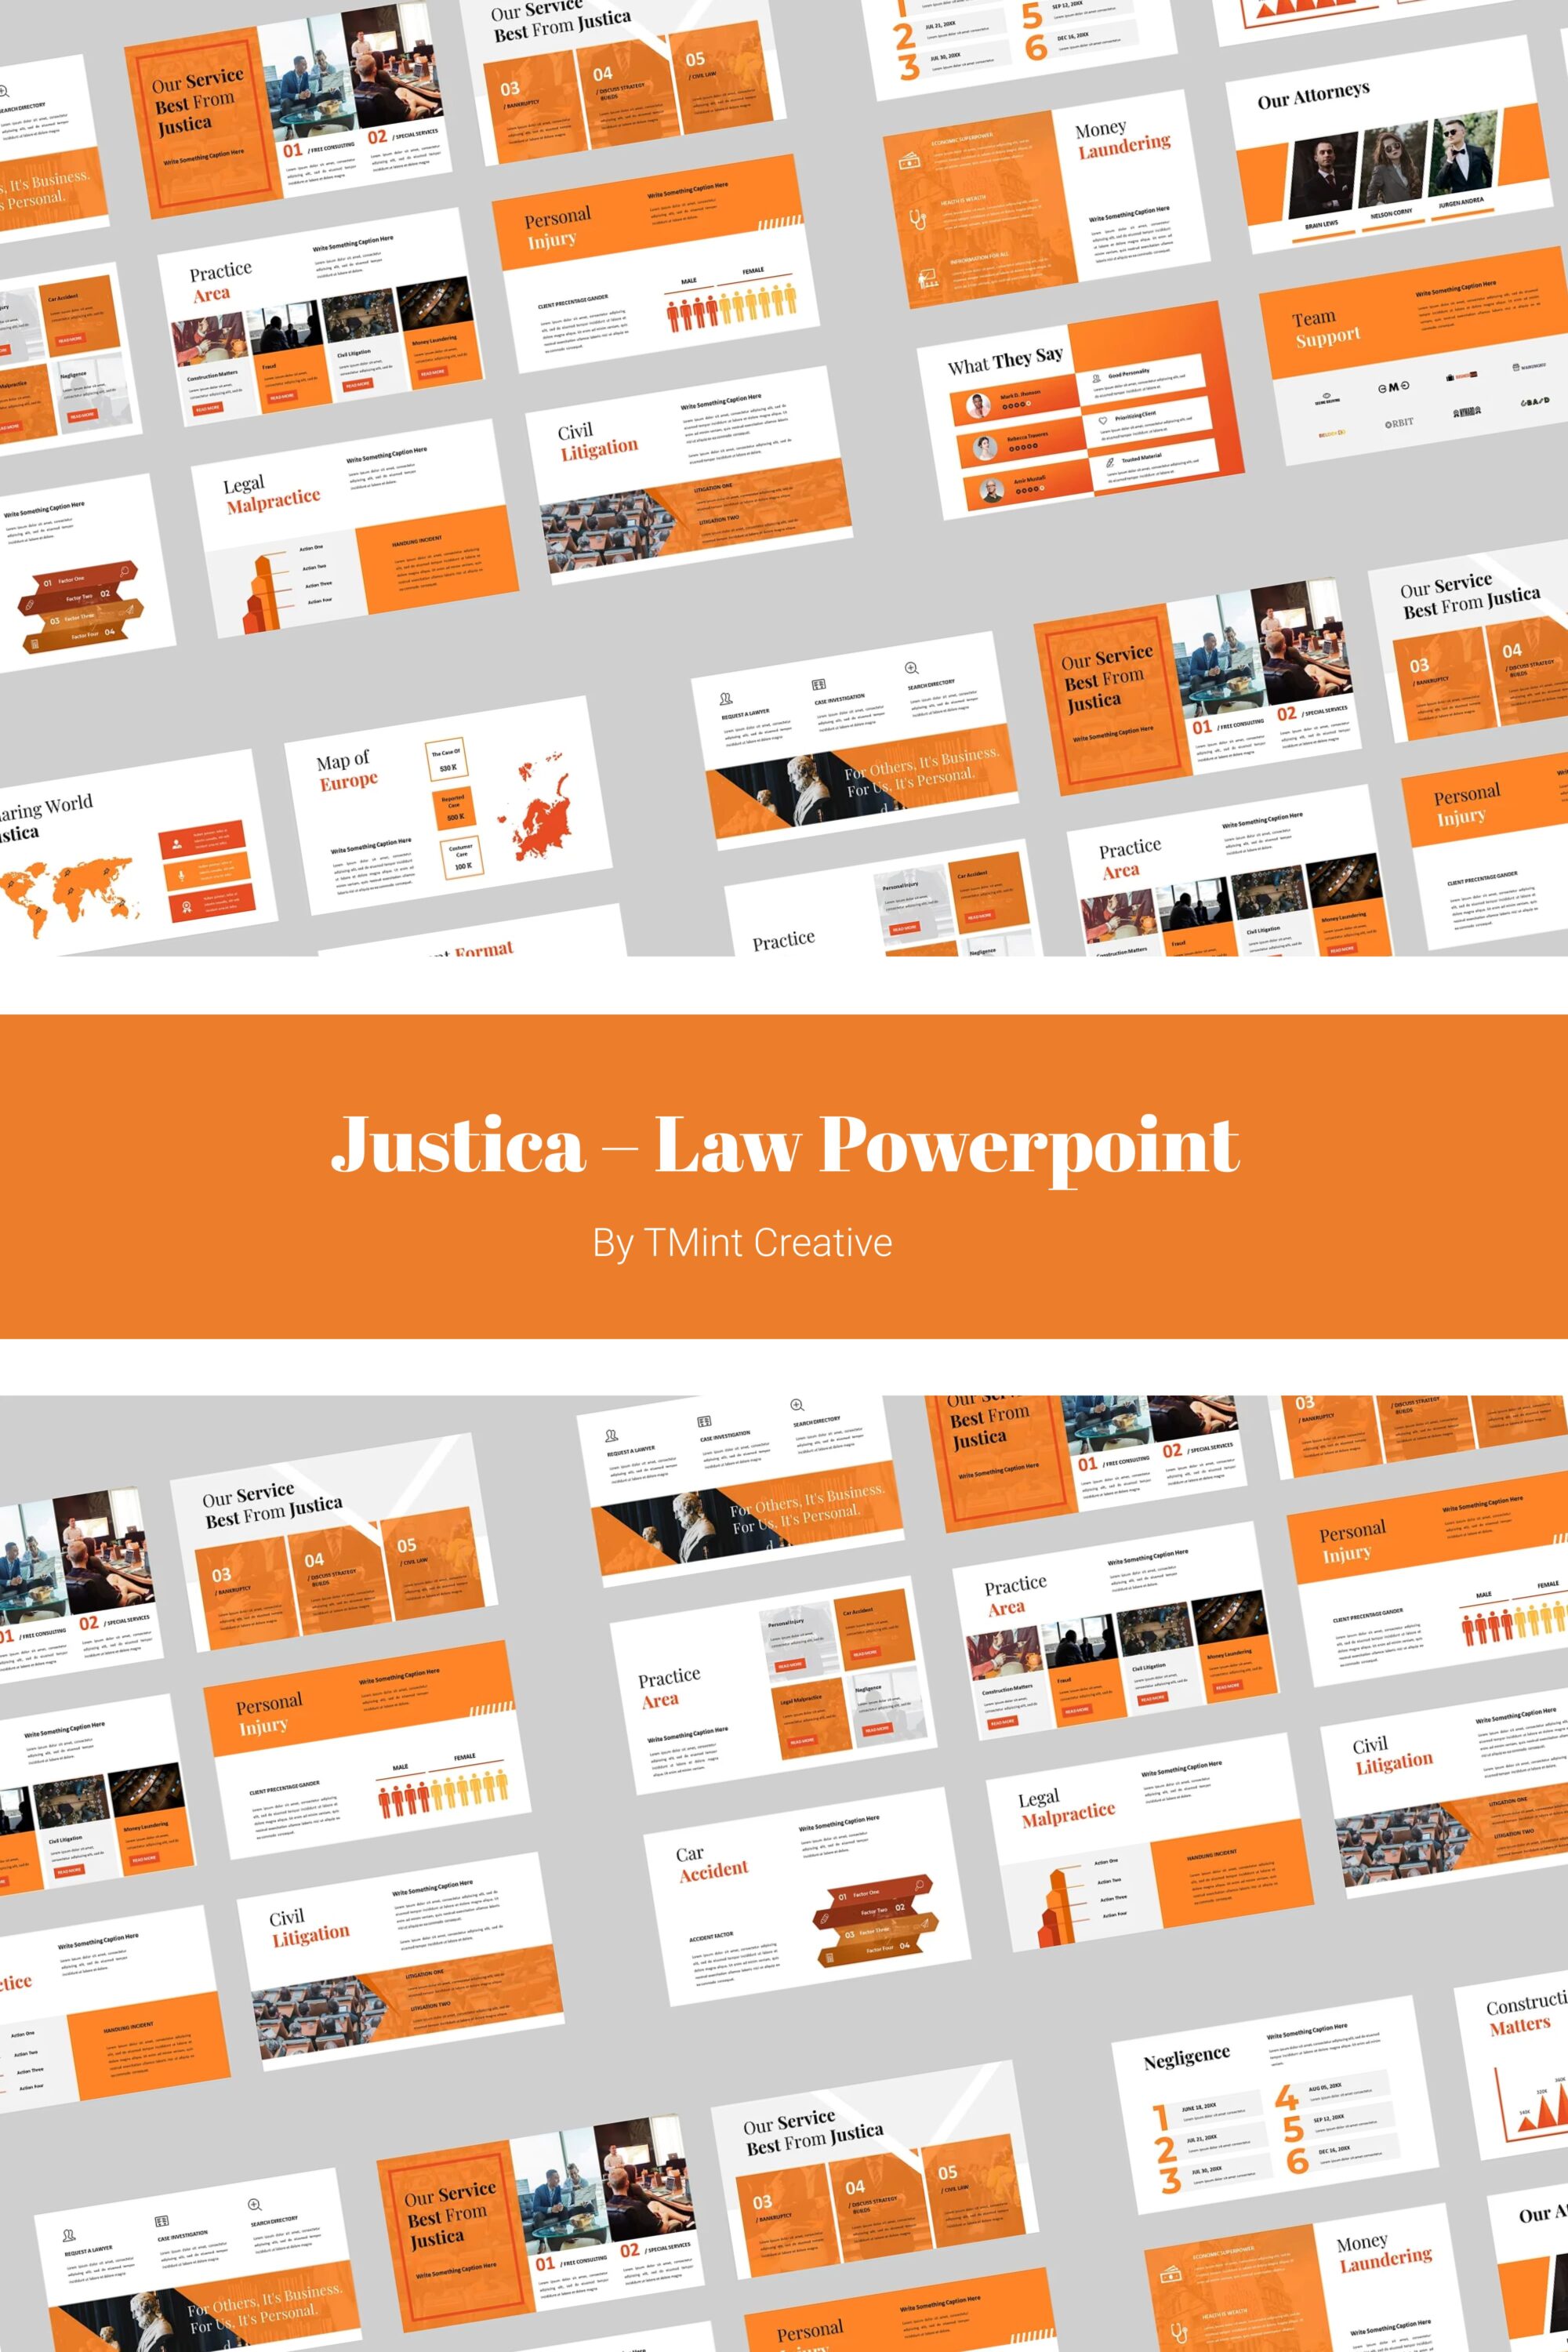 Justica Law Powerpoint 04.